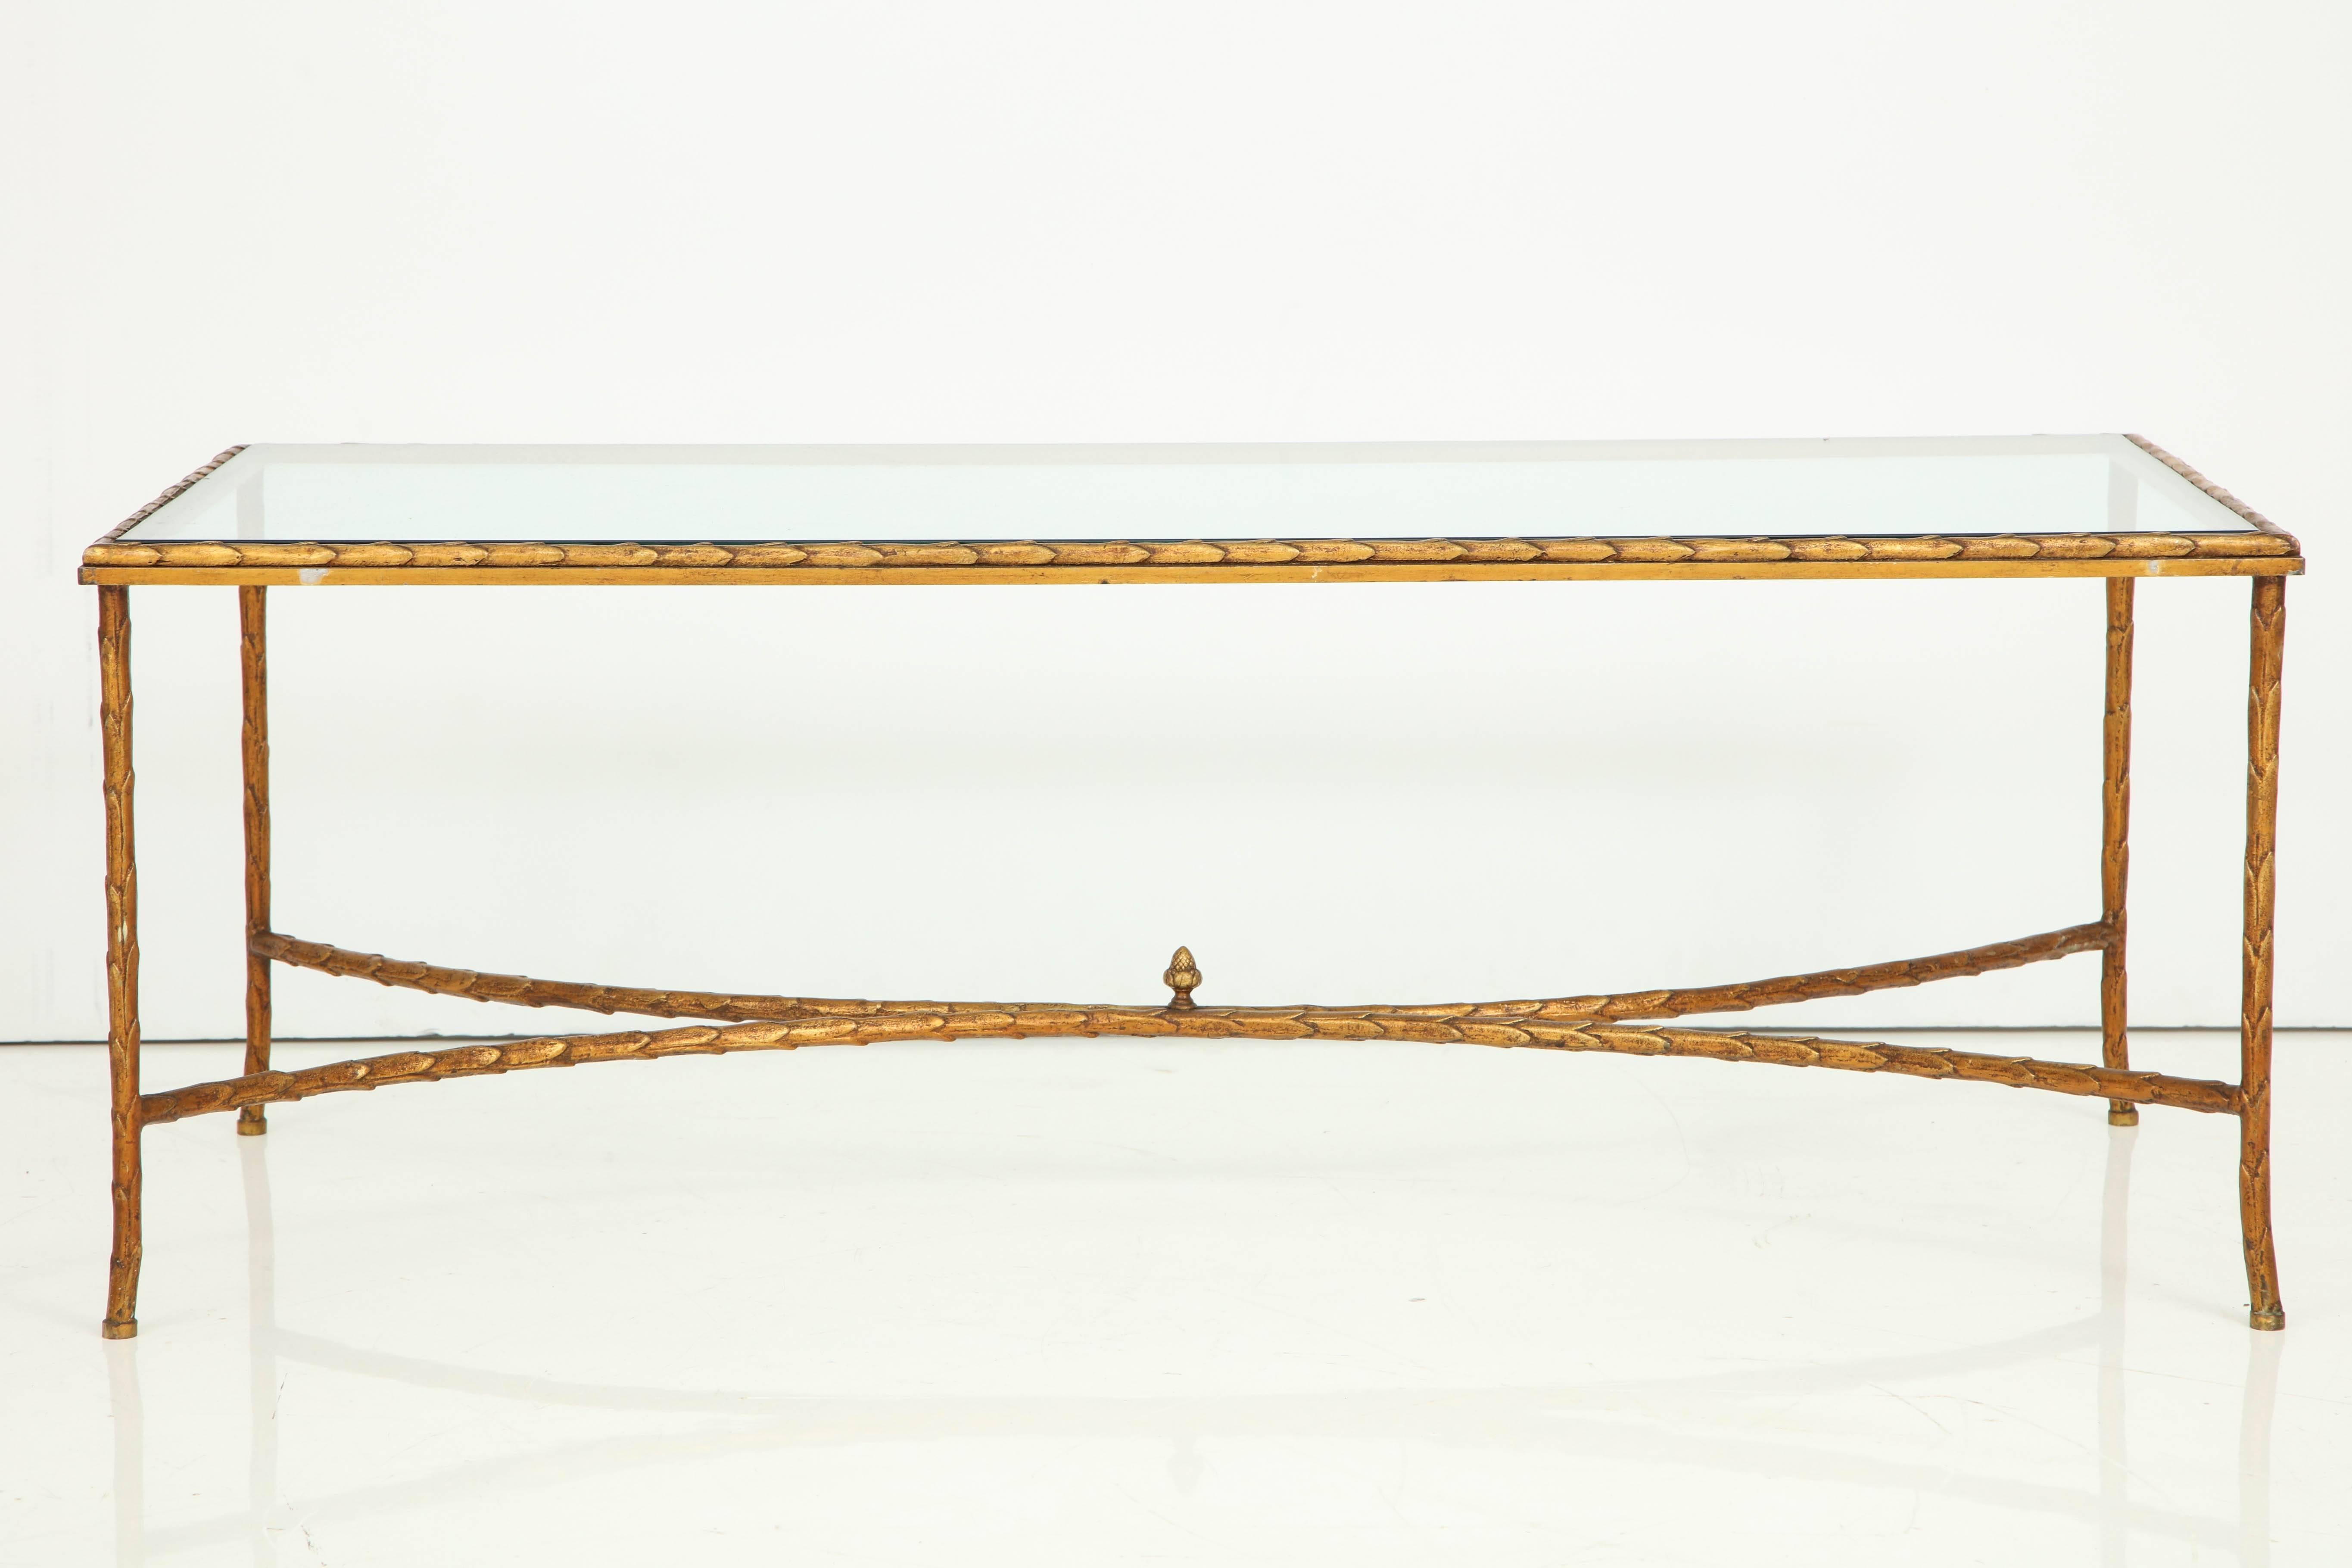 A gilt bronze cocktail table with a glass top attributed to Maison, Baguès, France. The glass top sits on the table frame with a leaf motif, characteristic of the elegance of Maison Baguès. The stretcher at base, composed of two curved elements, is